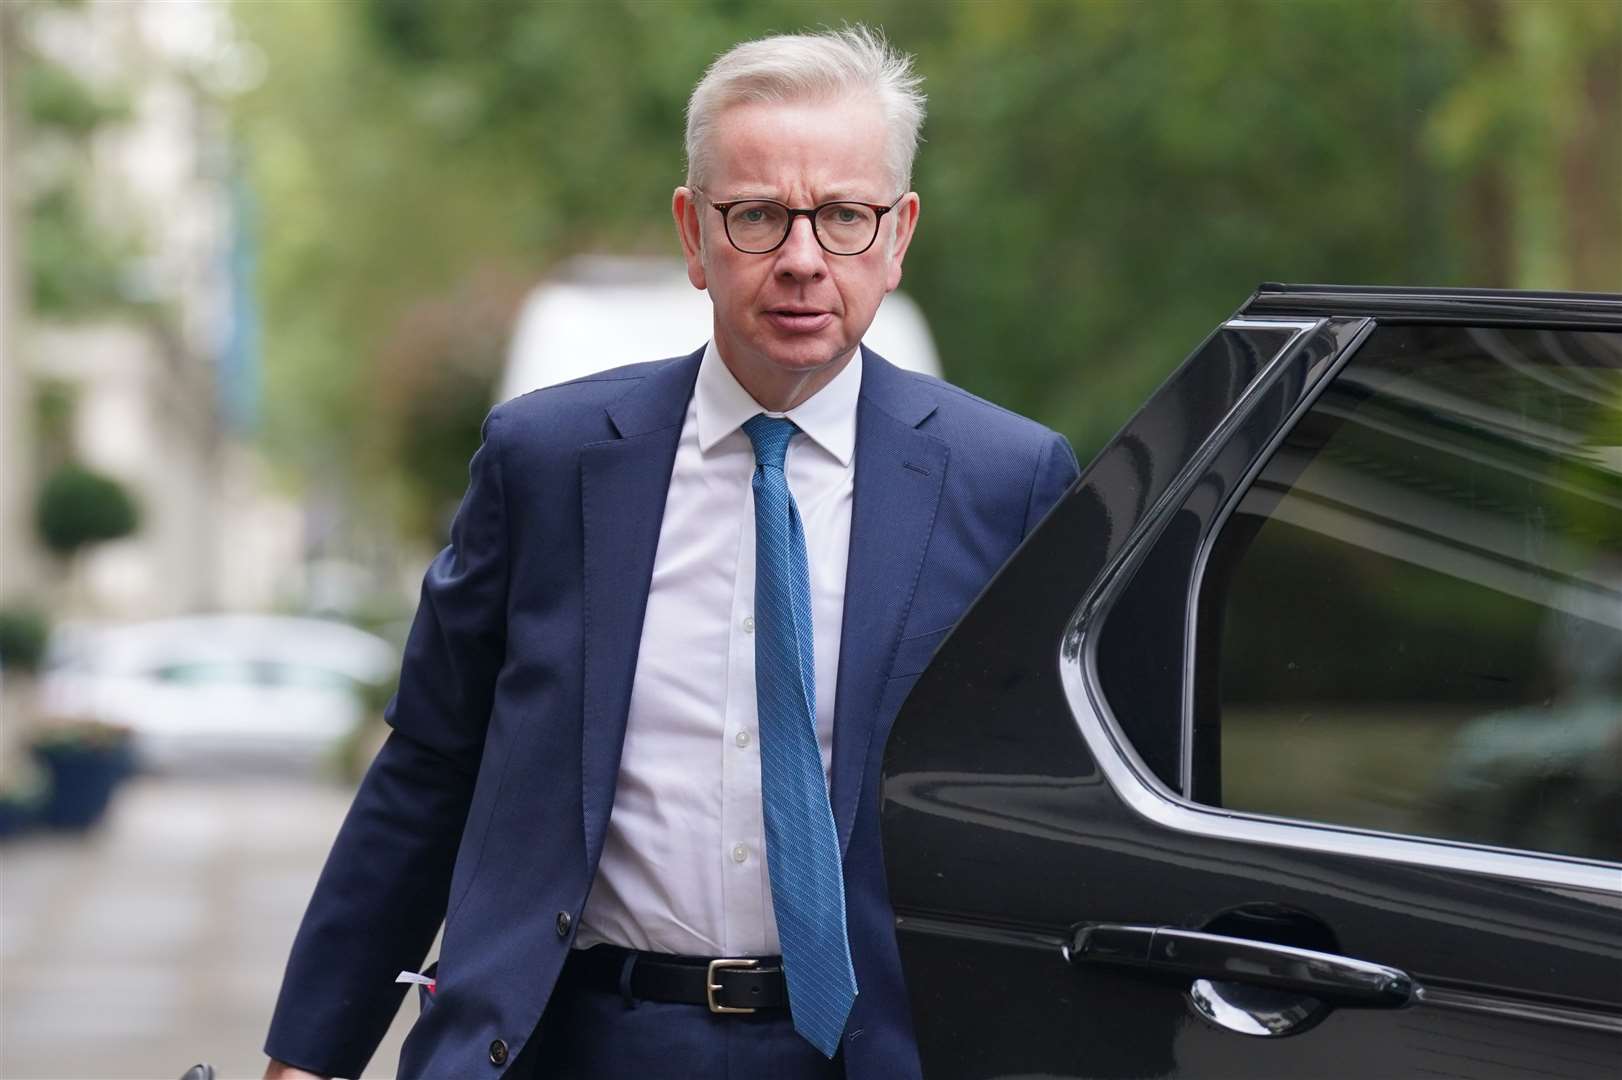 Housing Secretary Michael Gove said some groups were treating the environment like a ‘religious crusade’ (Lucy North/PA)